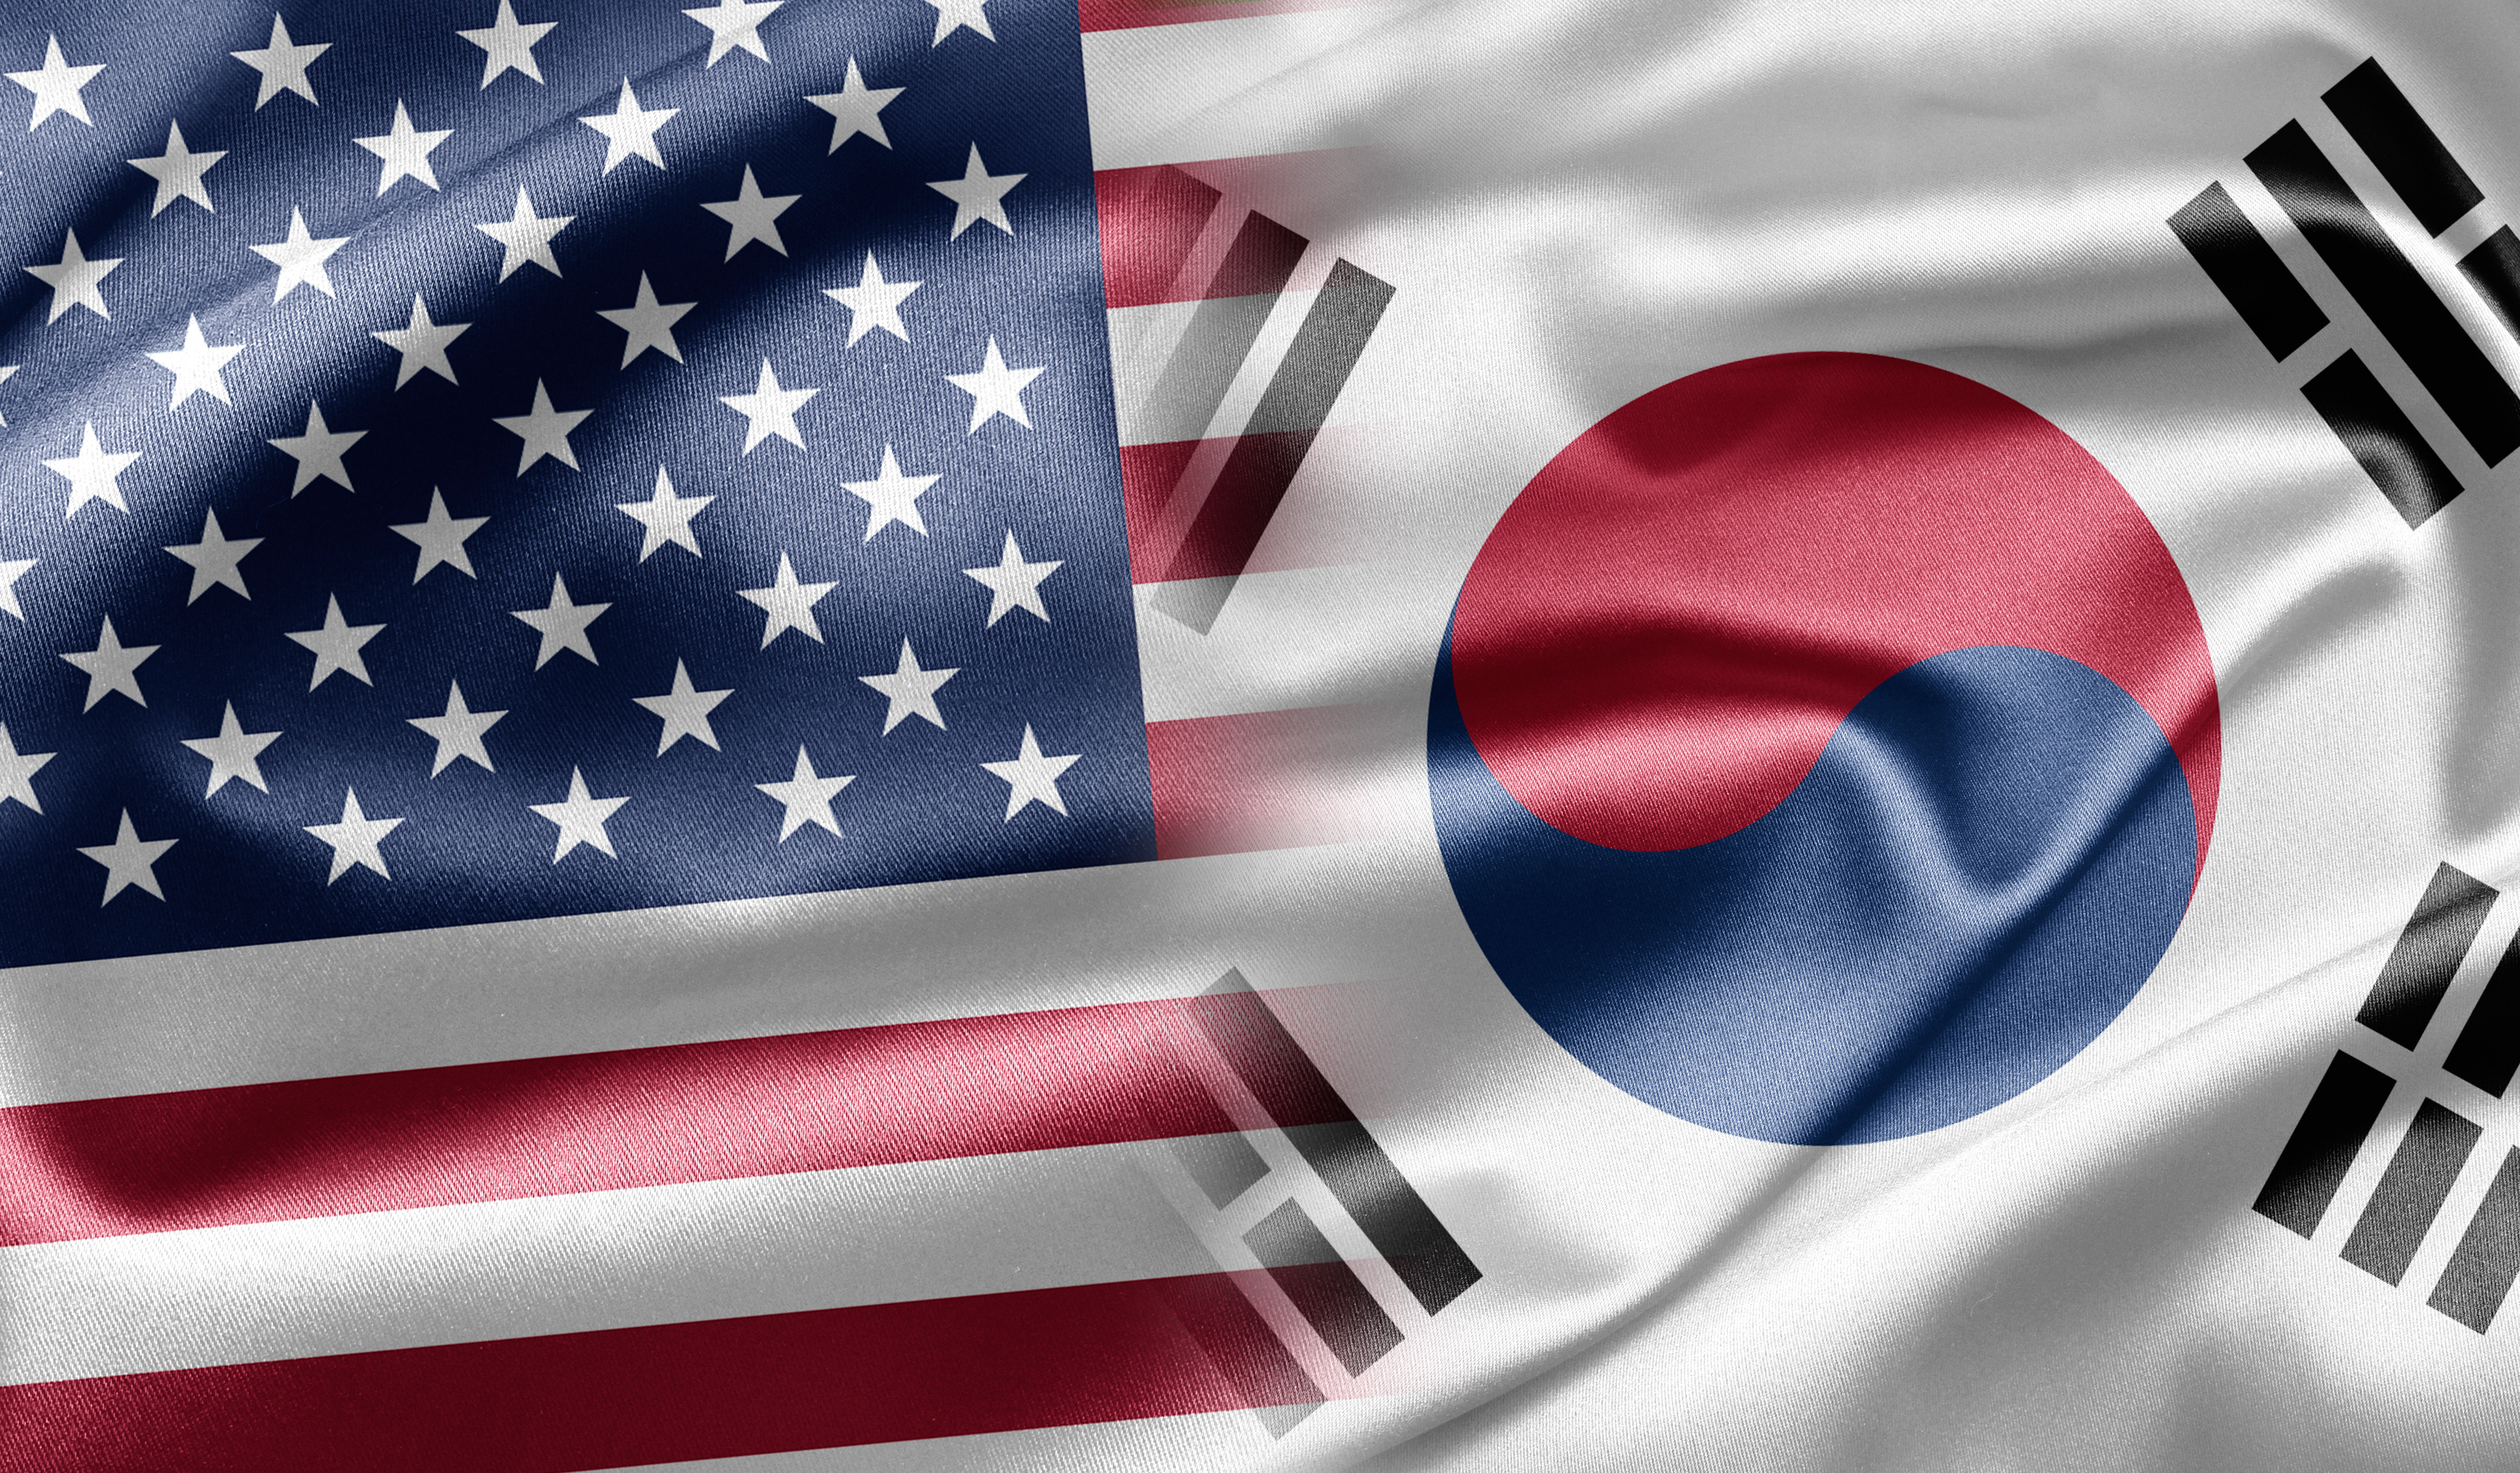 Flags of the United States of America and South Korea side by side.